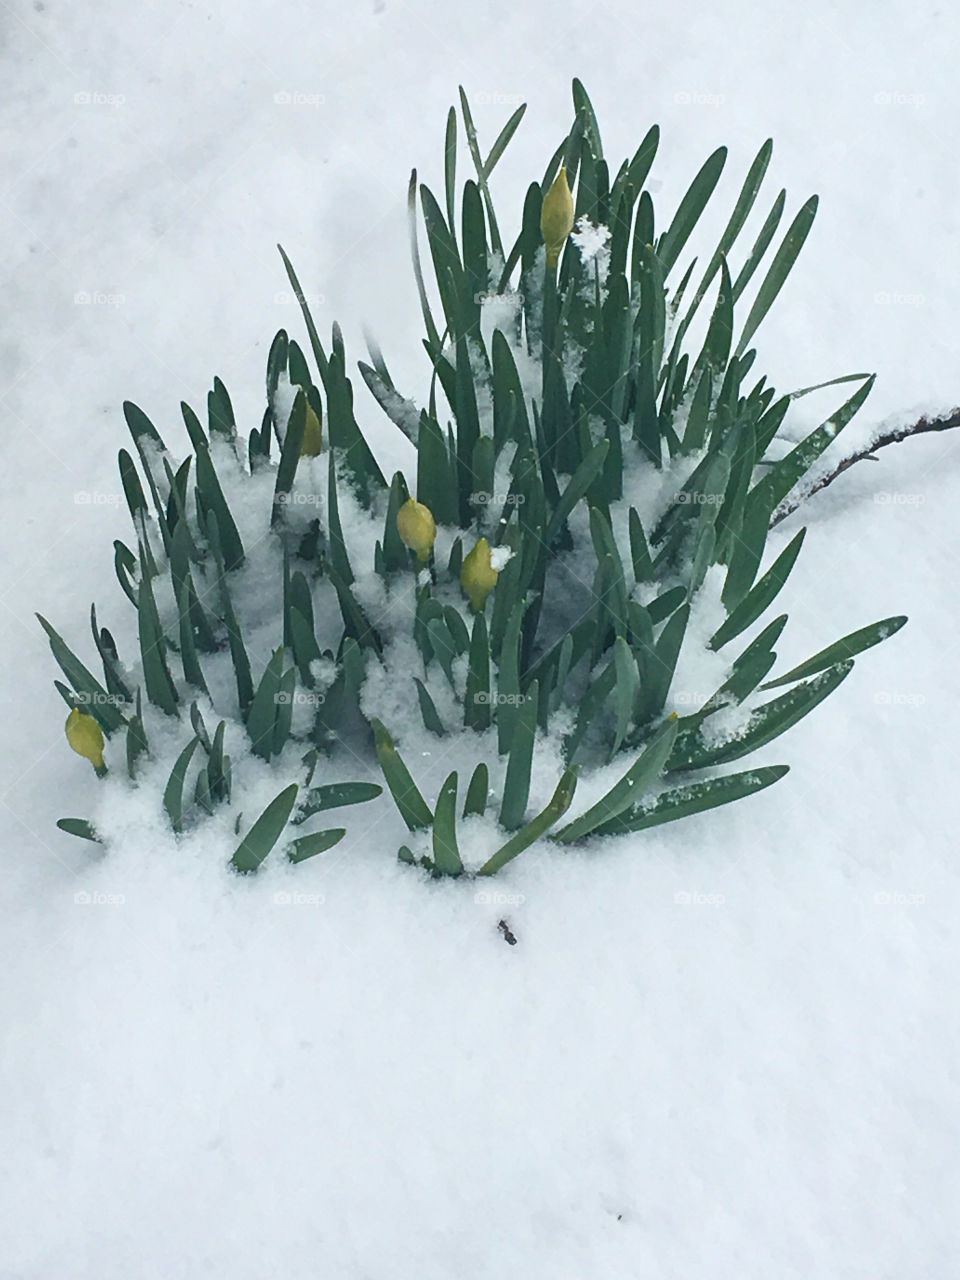 Spring flowers pushing up through the snow